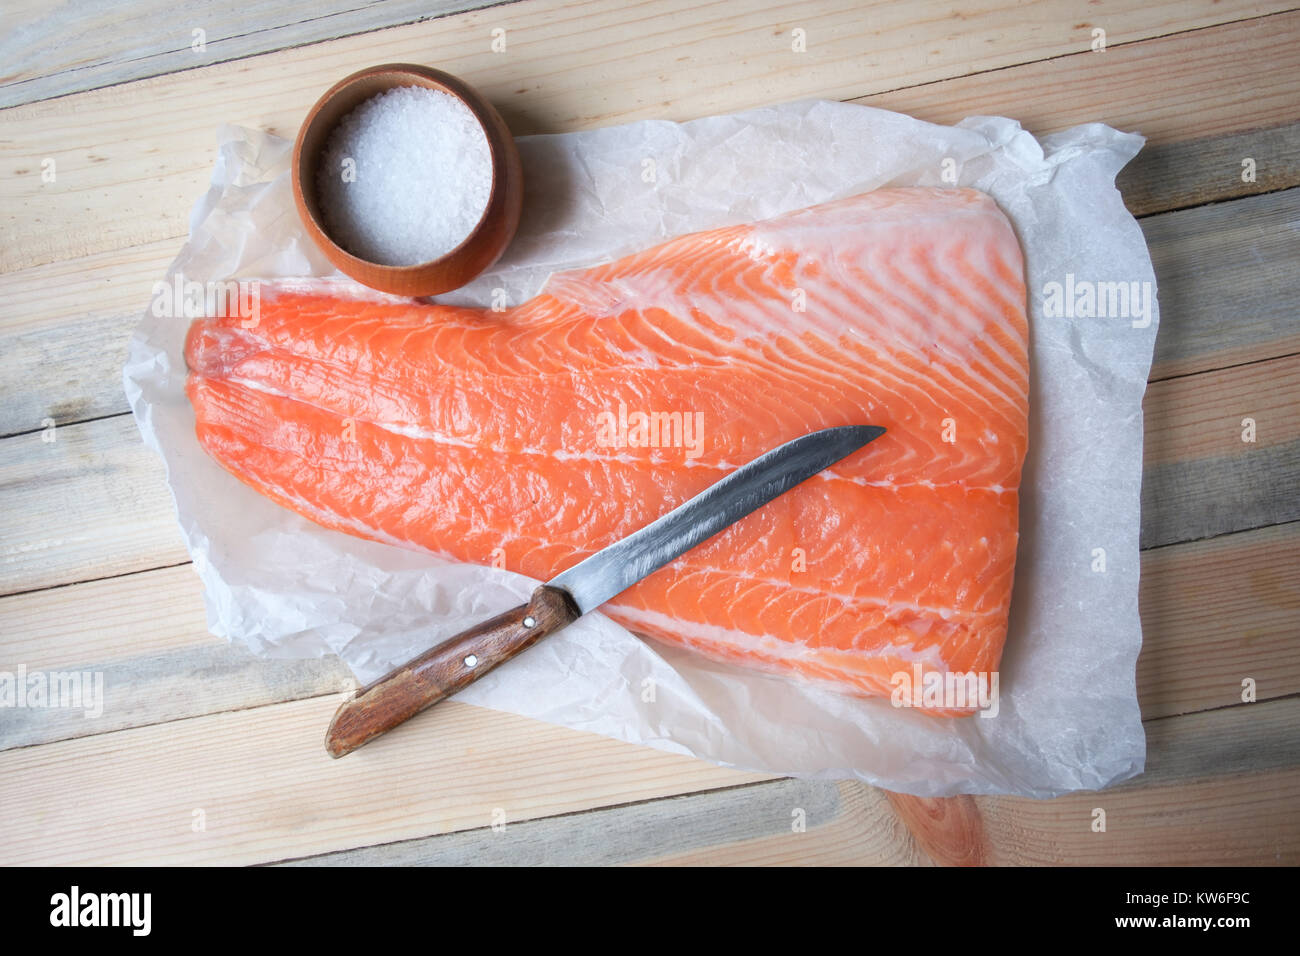 Fillet of salmon fish on wooden table Stock Photo